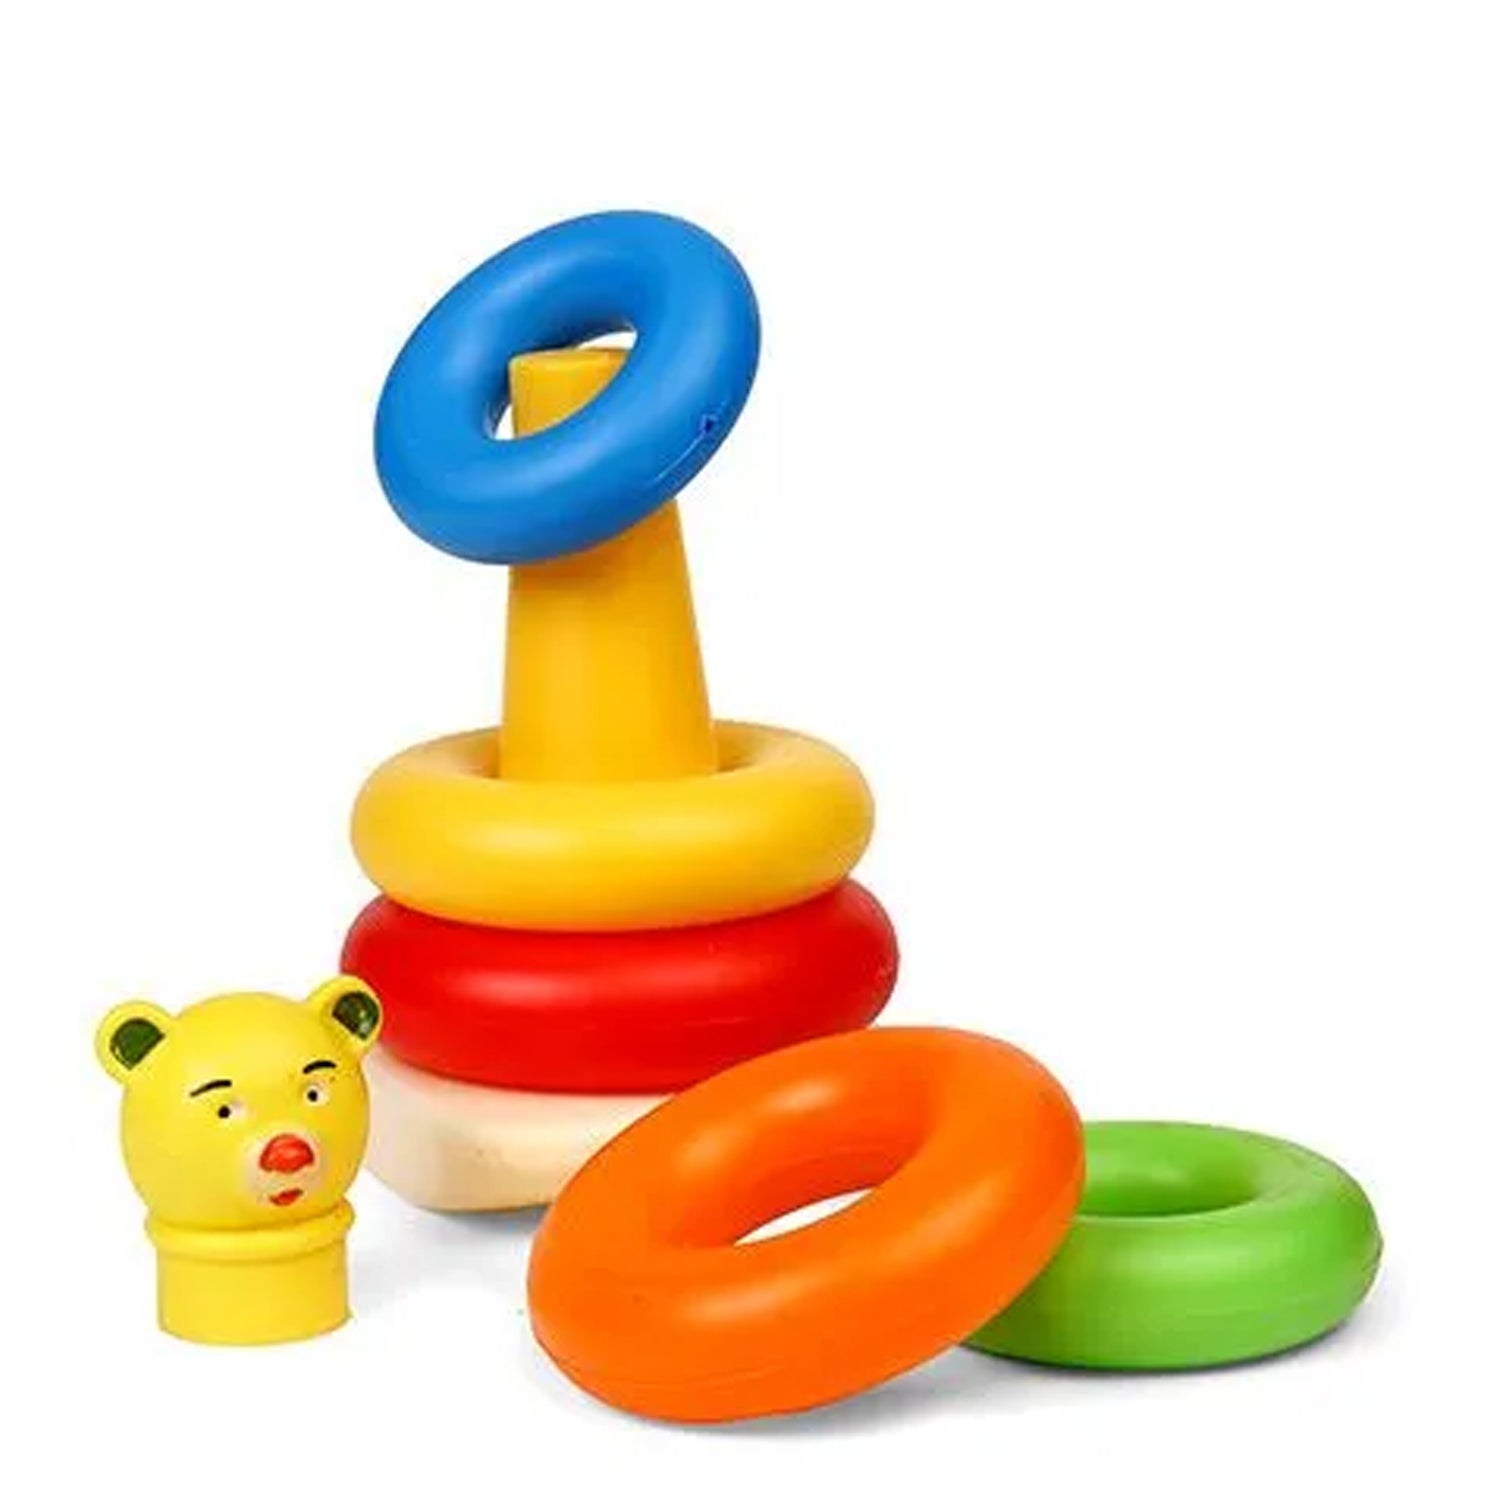 8017 Plastic Baby Kids Teddy Stacking Ring Jumbo Stack Up Educational Toy 5pc 